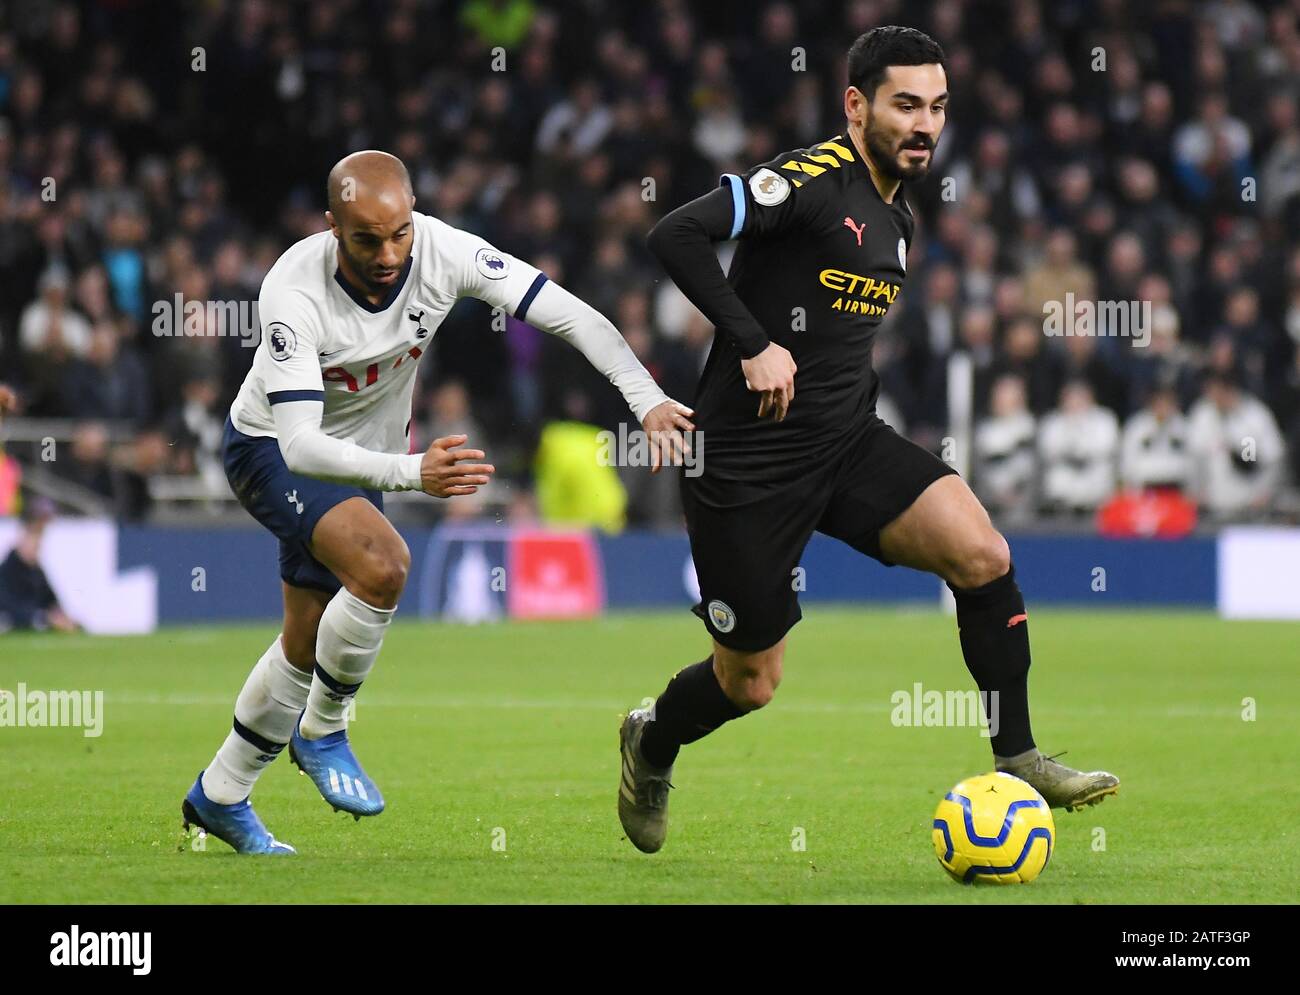 LONDON, ENGLAND - FEBRUARY 2, 2020: Lucas Moura of Tottenham and Ilkay Gundogan of City pictured during the 2019/20 Premier League game between Tottenham Hotspur FC and Manchester City FC at Tottenham Hotspur Stadium. Stock Photo